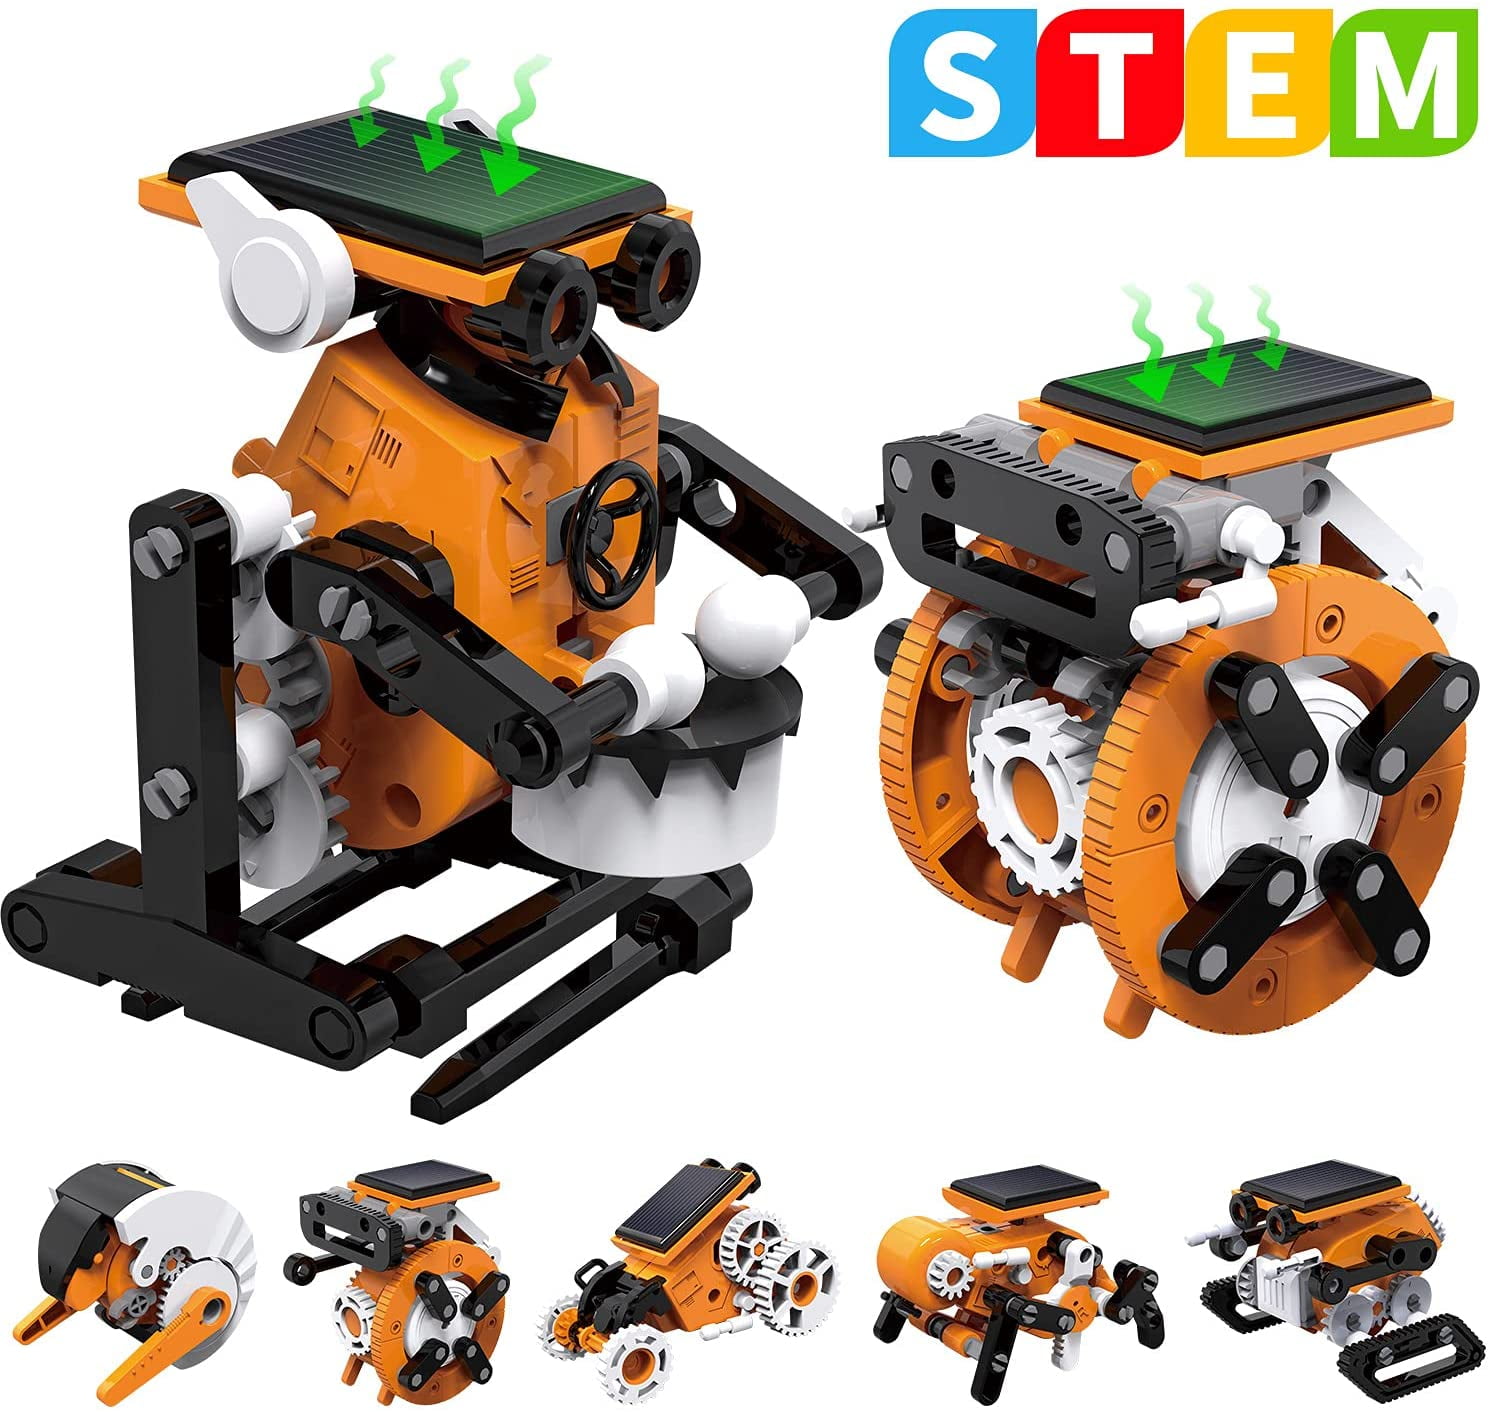 Build Your Own Hydraulic Robot Arm Kids DIY Educational Science Toy Gift 